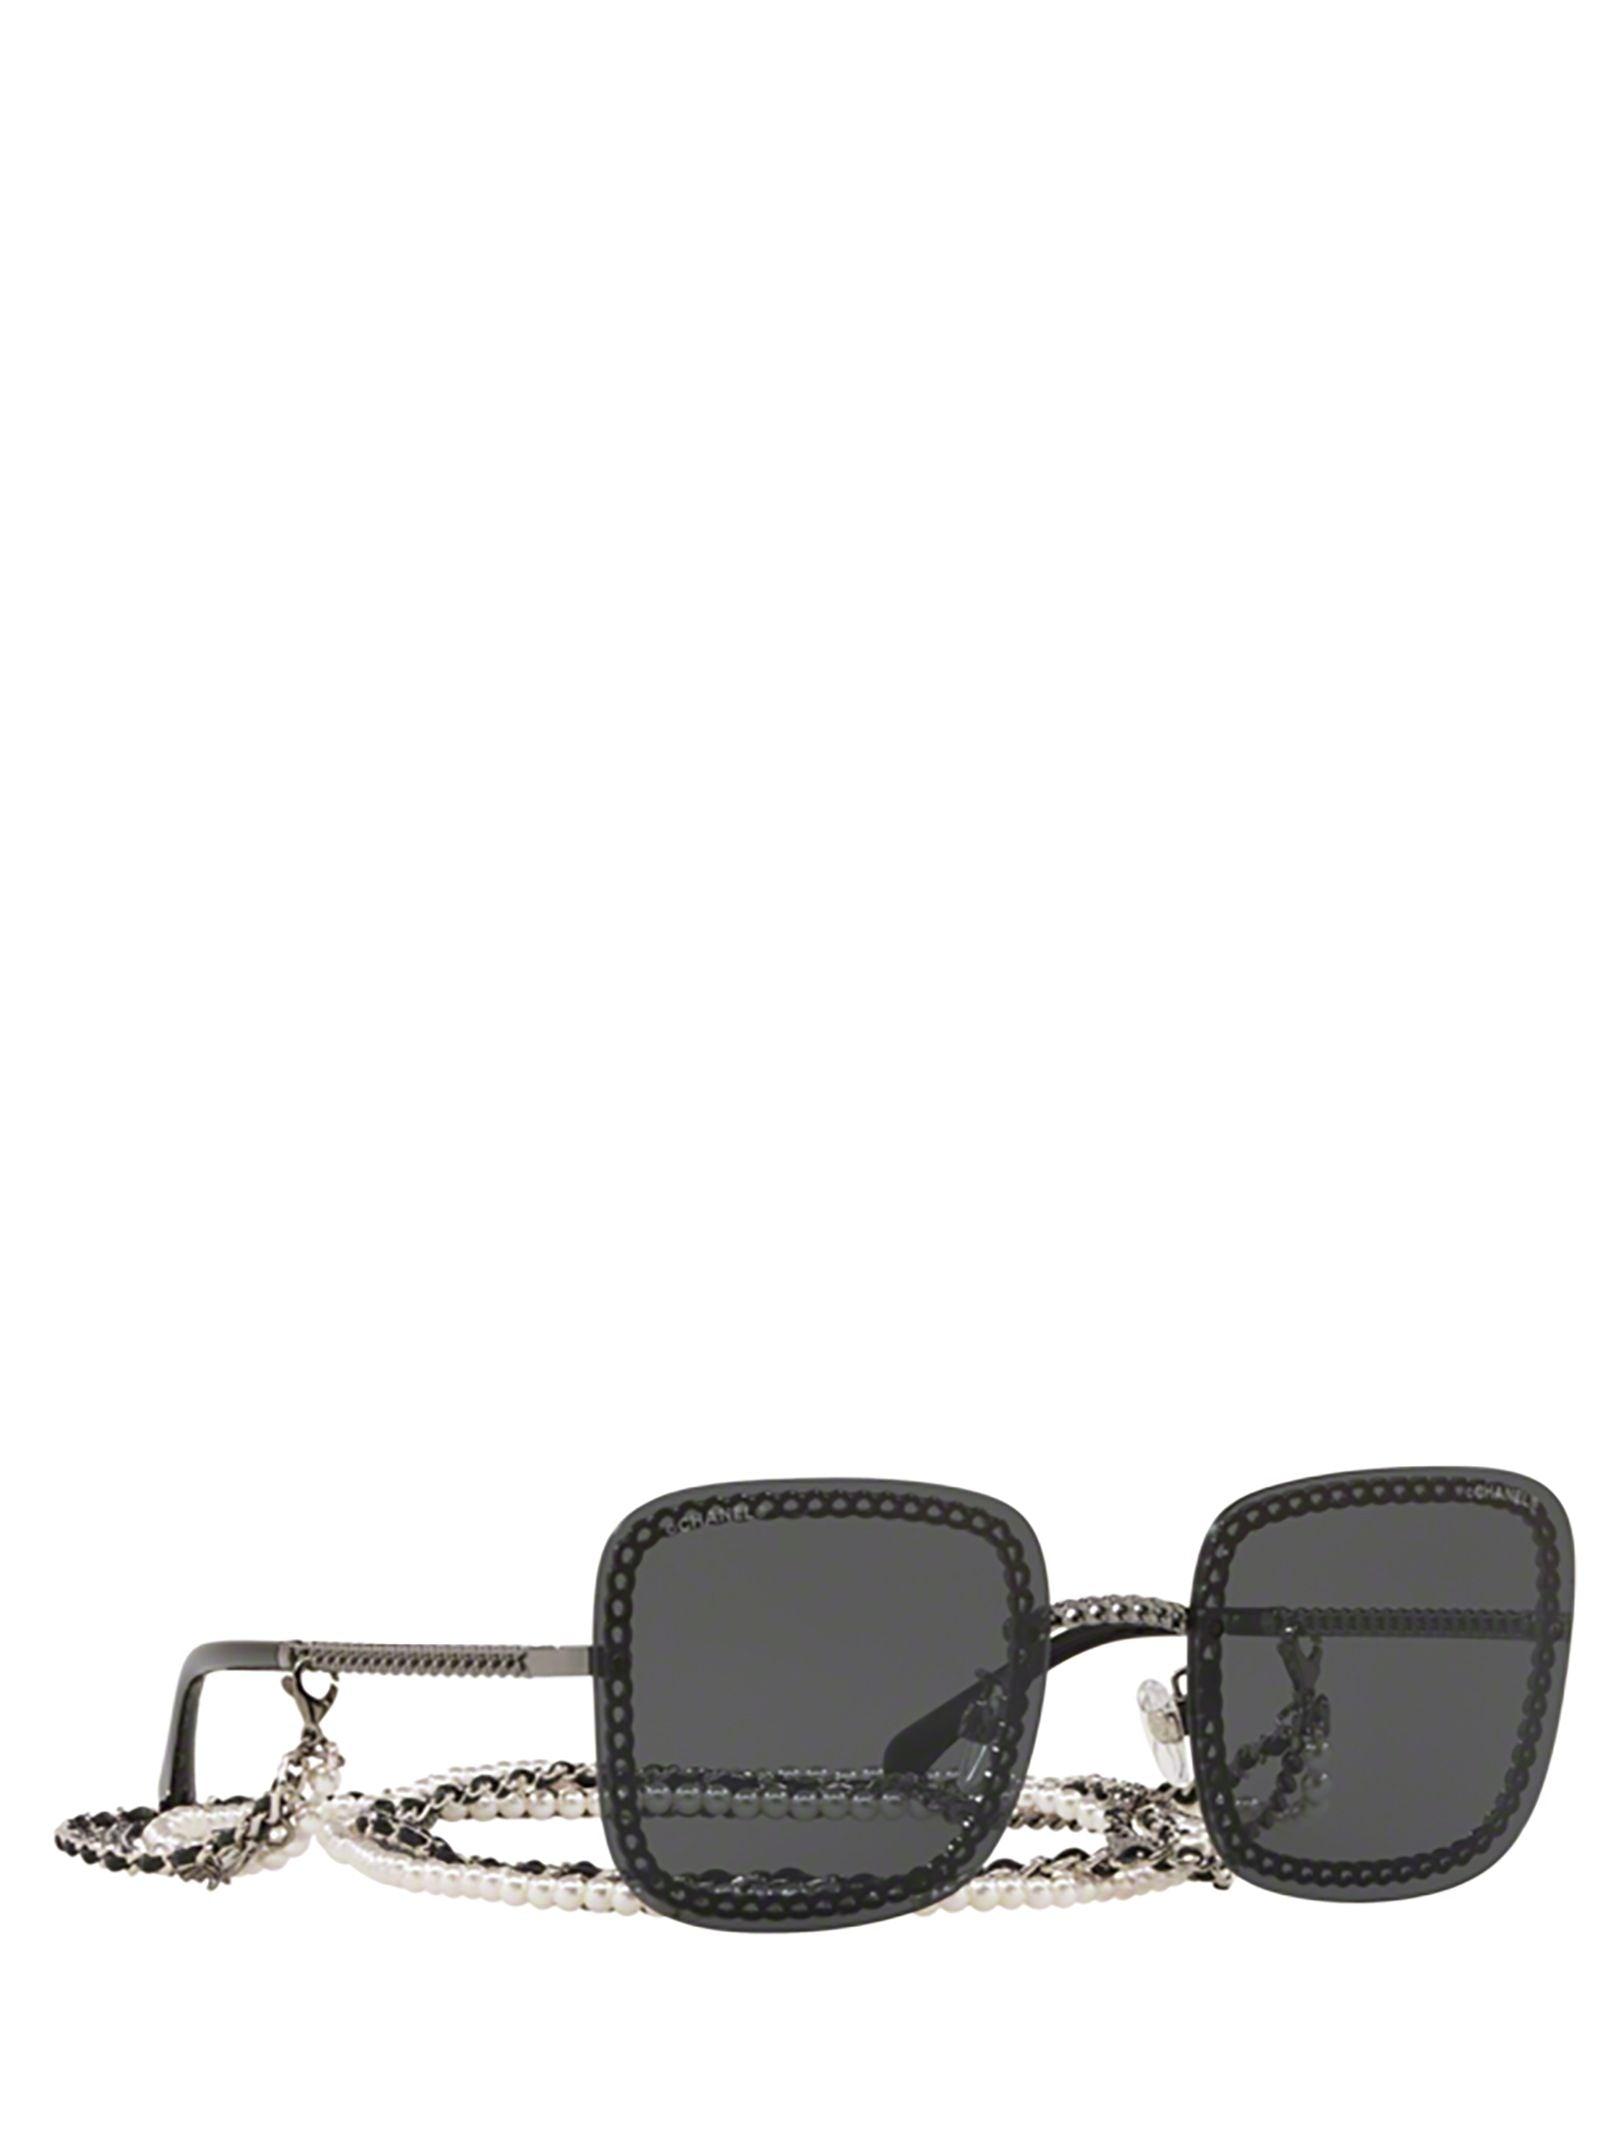 Chanel Square Frame Chain Sunglasses | Lyst